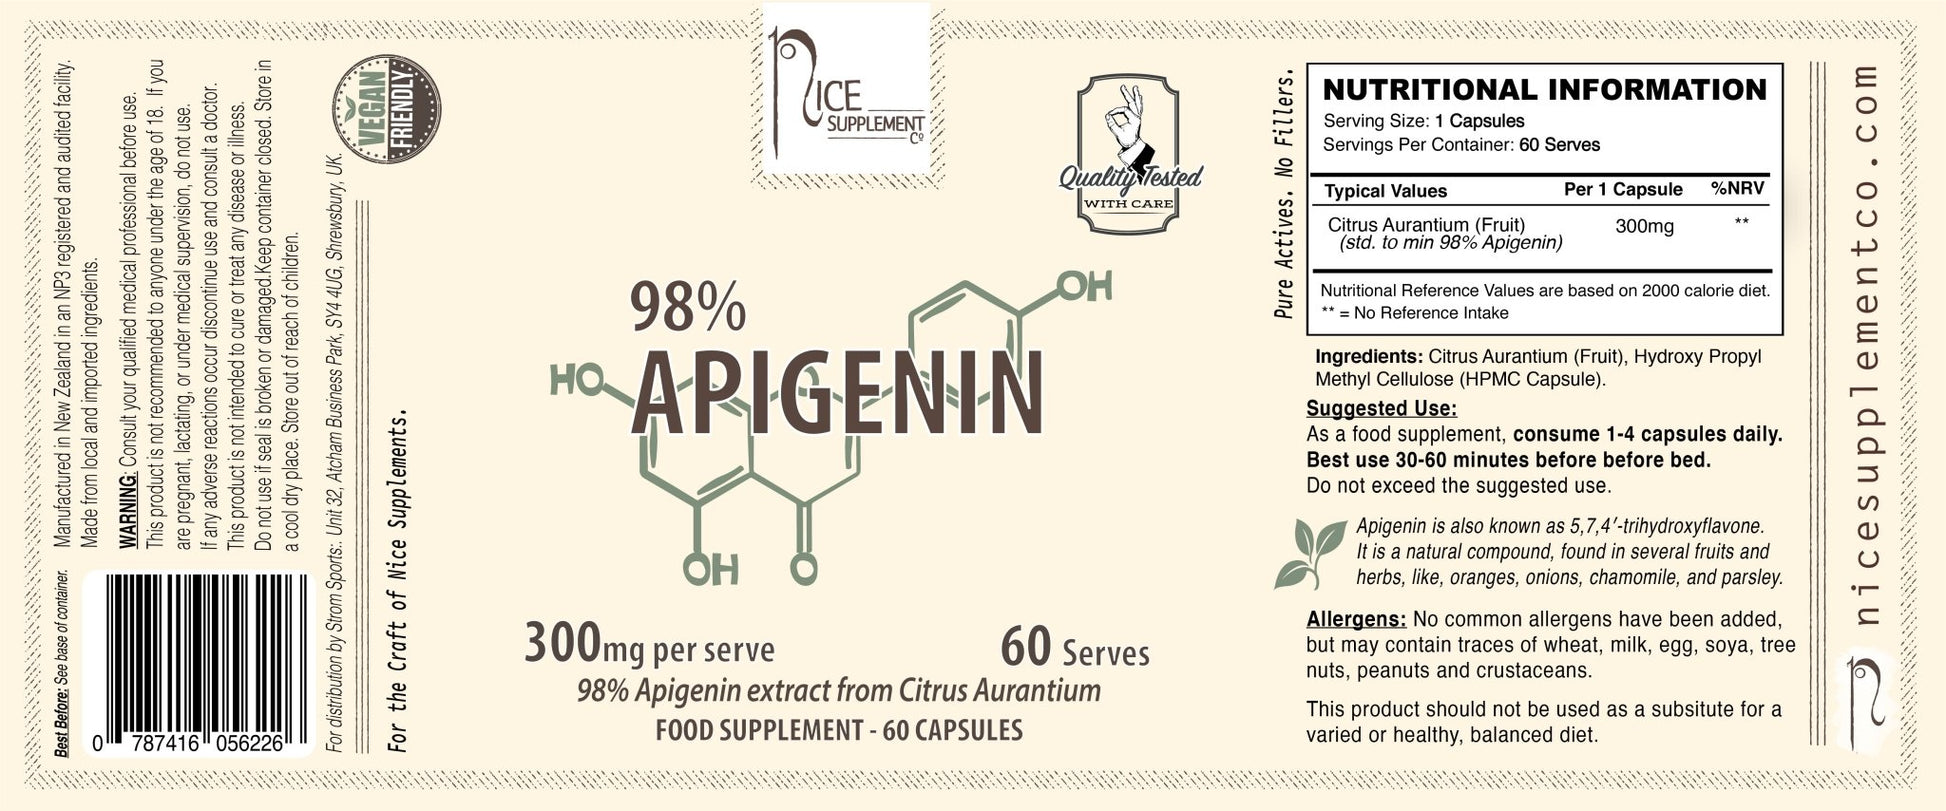 300mg Apigenin for sleep and stress - 60 Capsules - Label - Nice Supplement Co.